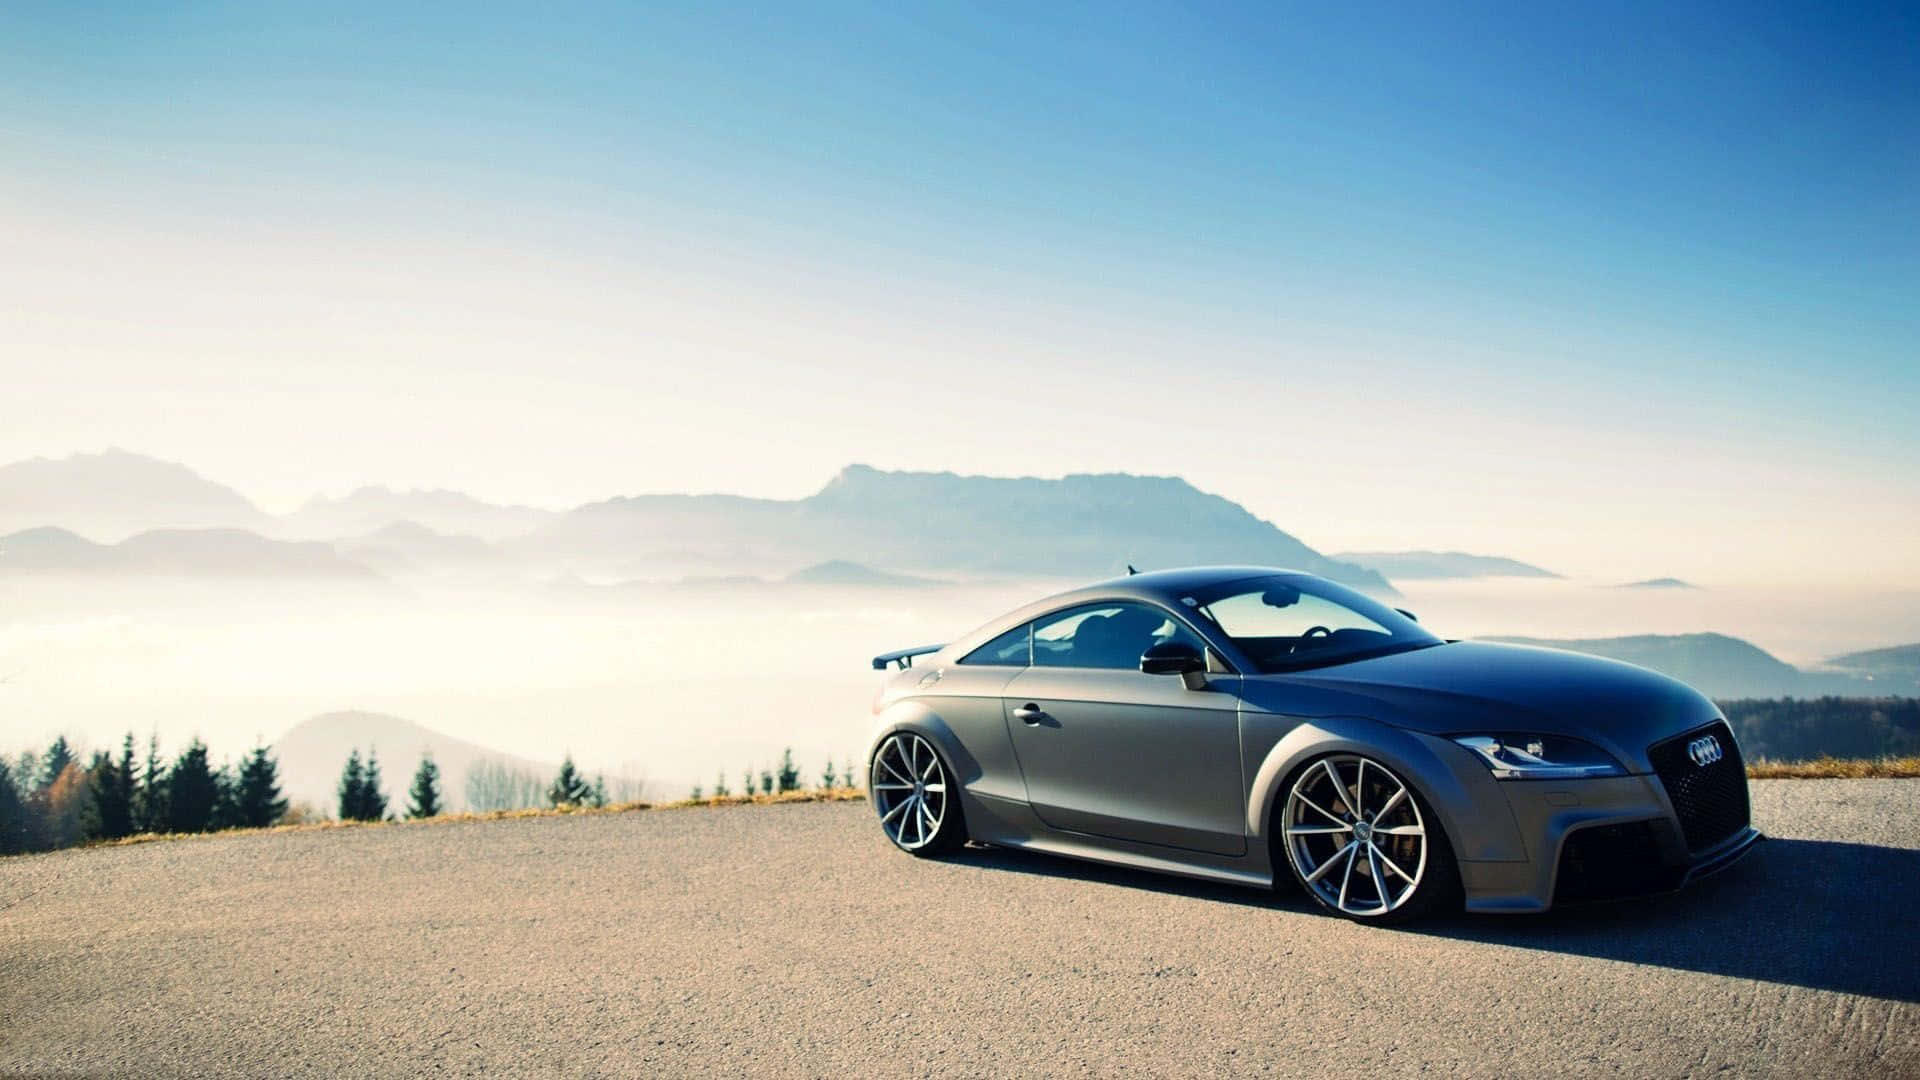 Audi TT: Performance and Luxury Personified. Wallpaper